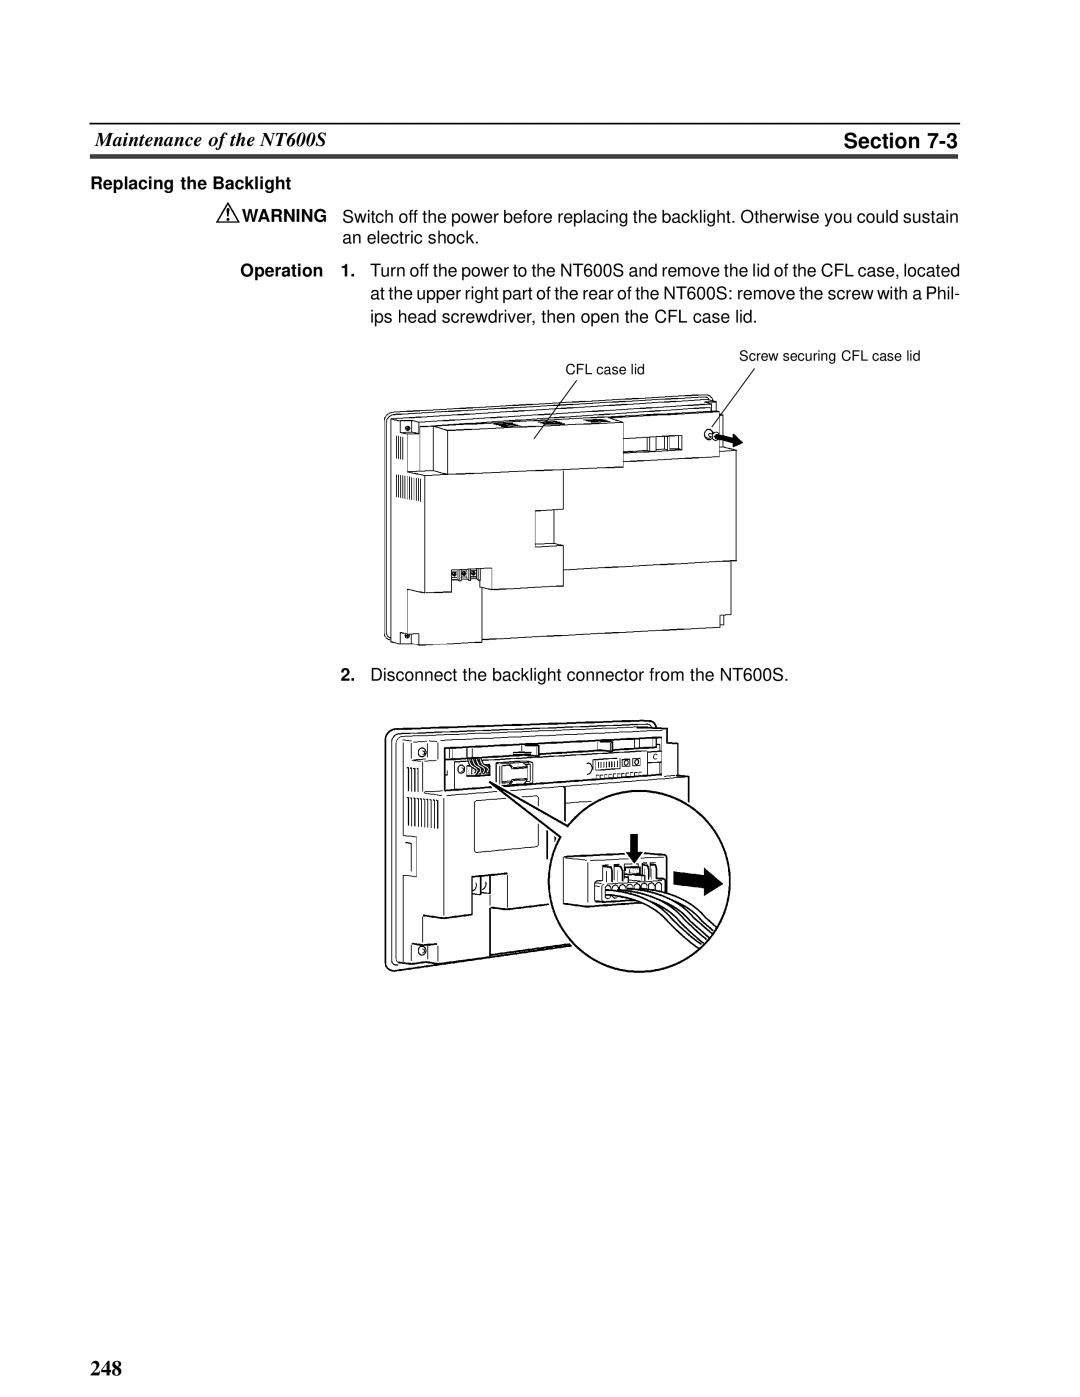 Omron V022-E3-1 operation manual Section, Replacing the Backlight, Screw securing CFL case lid CFL case lid 